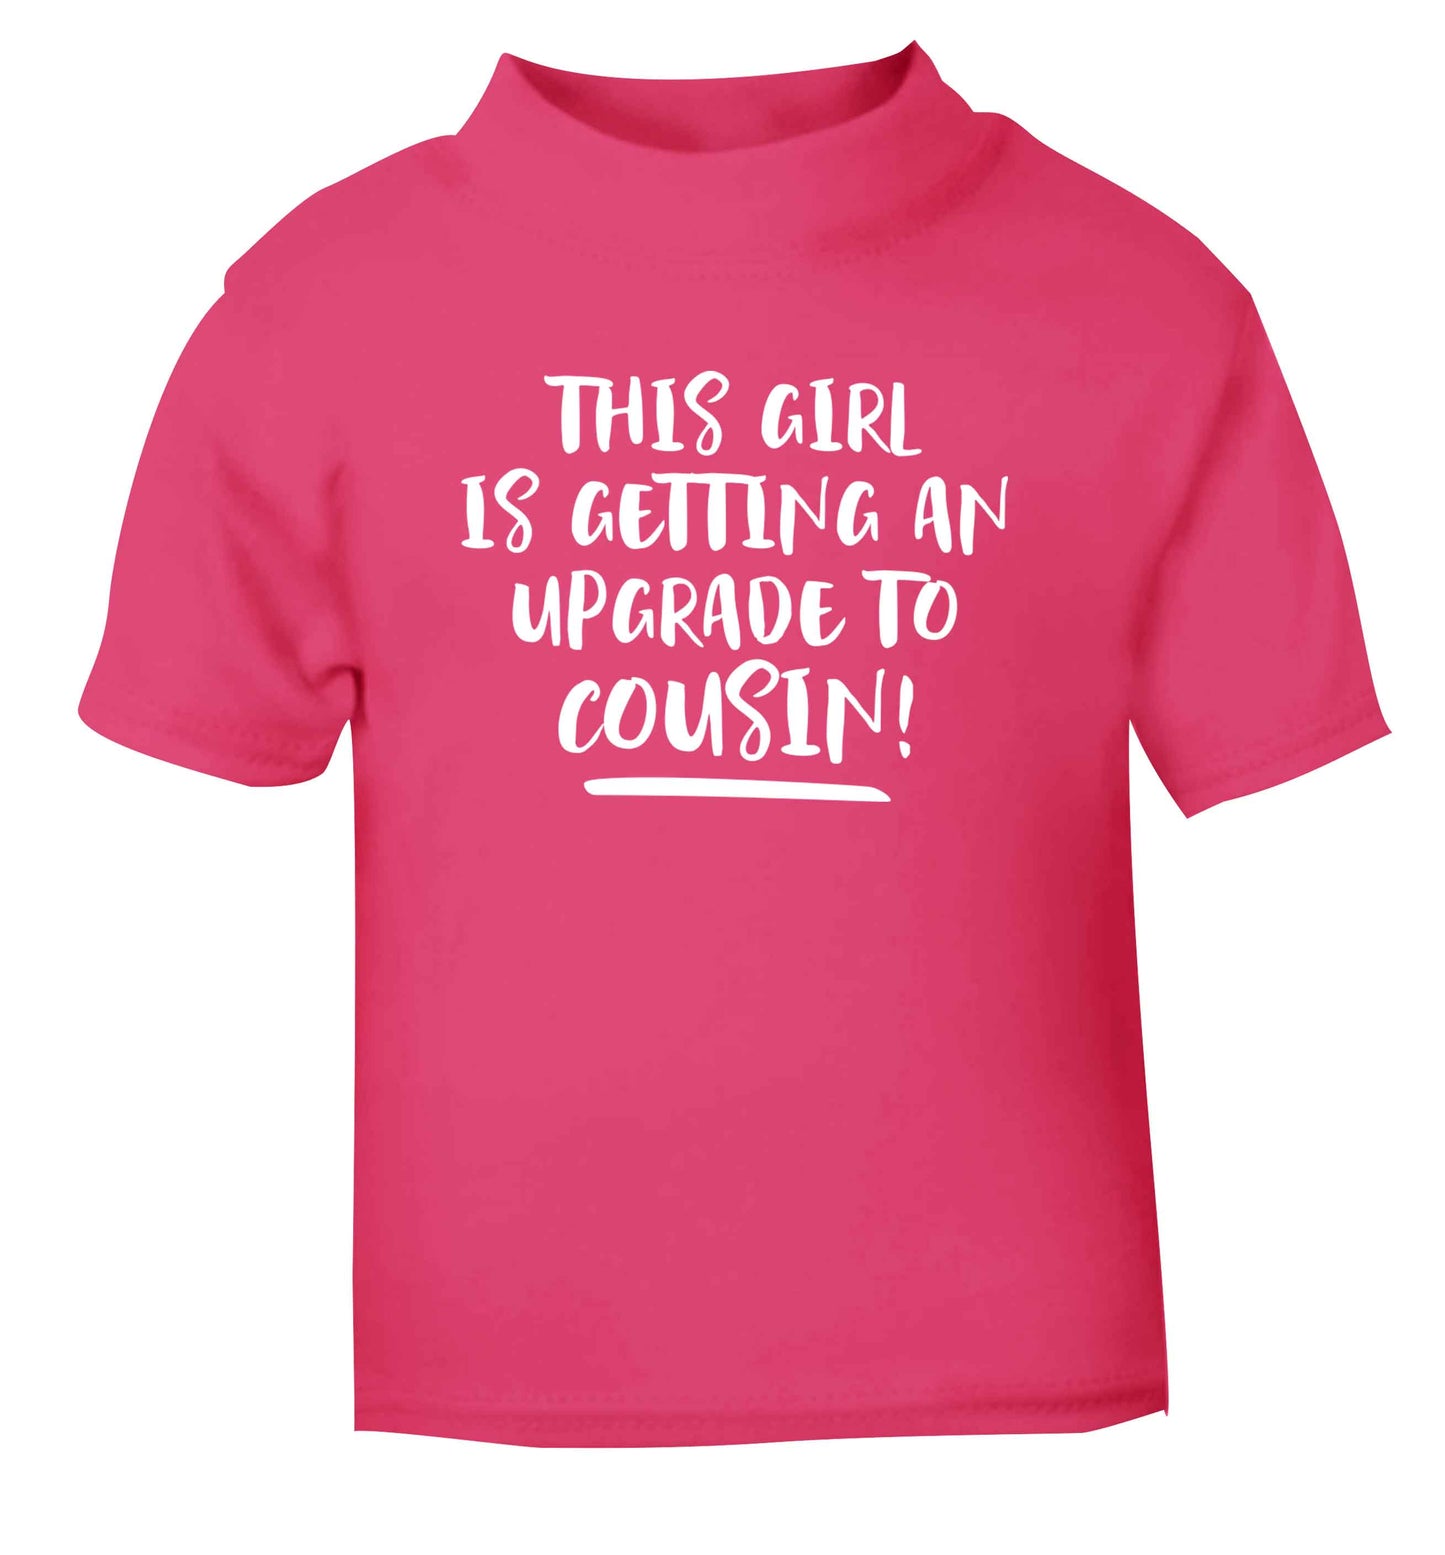 This girl is getting an upgrade to cousin! pink Baby Toddler Tshirt 2 Years